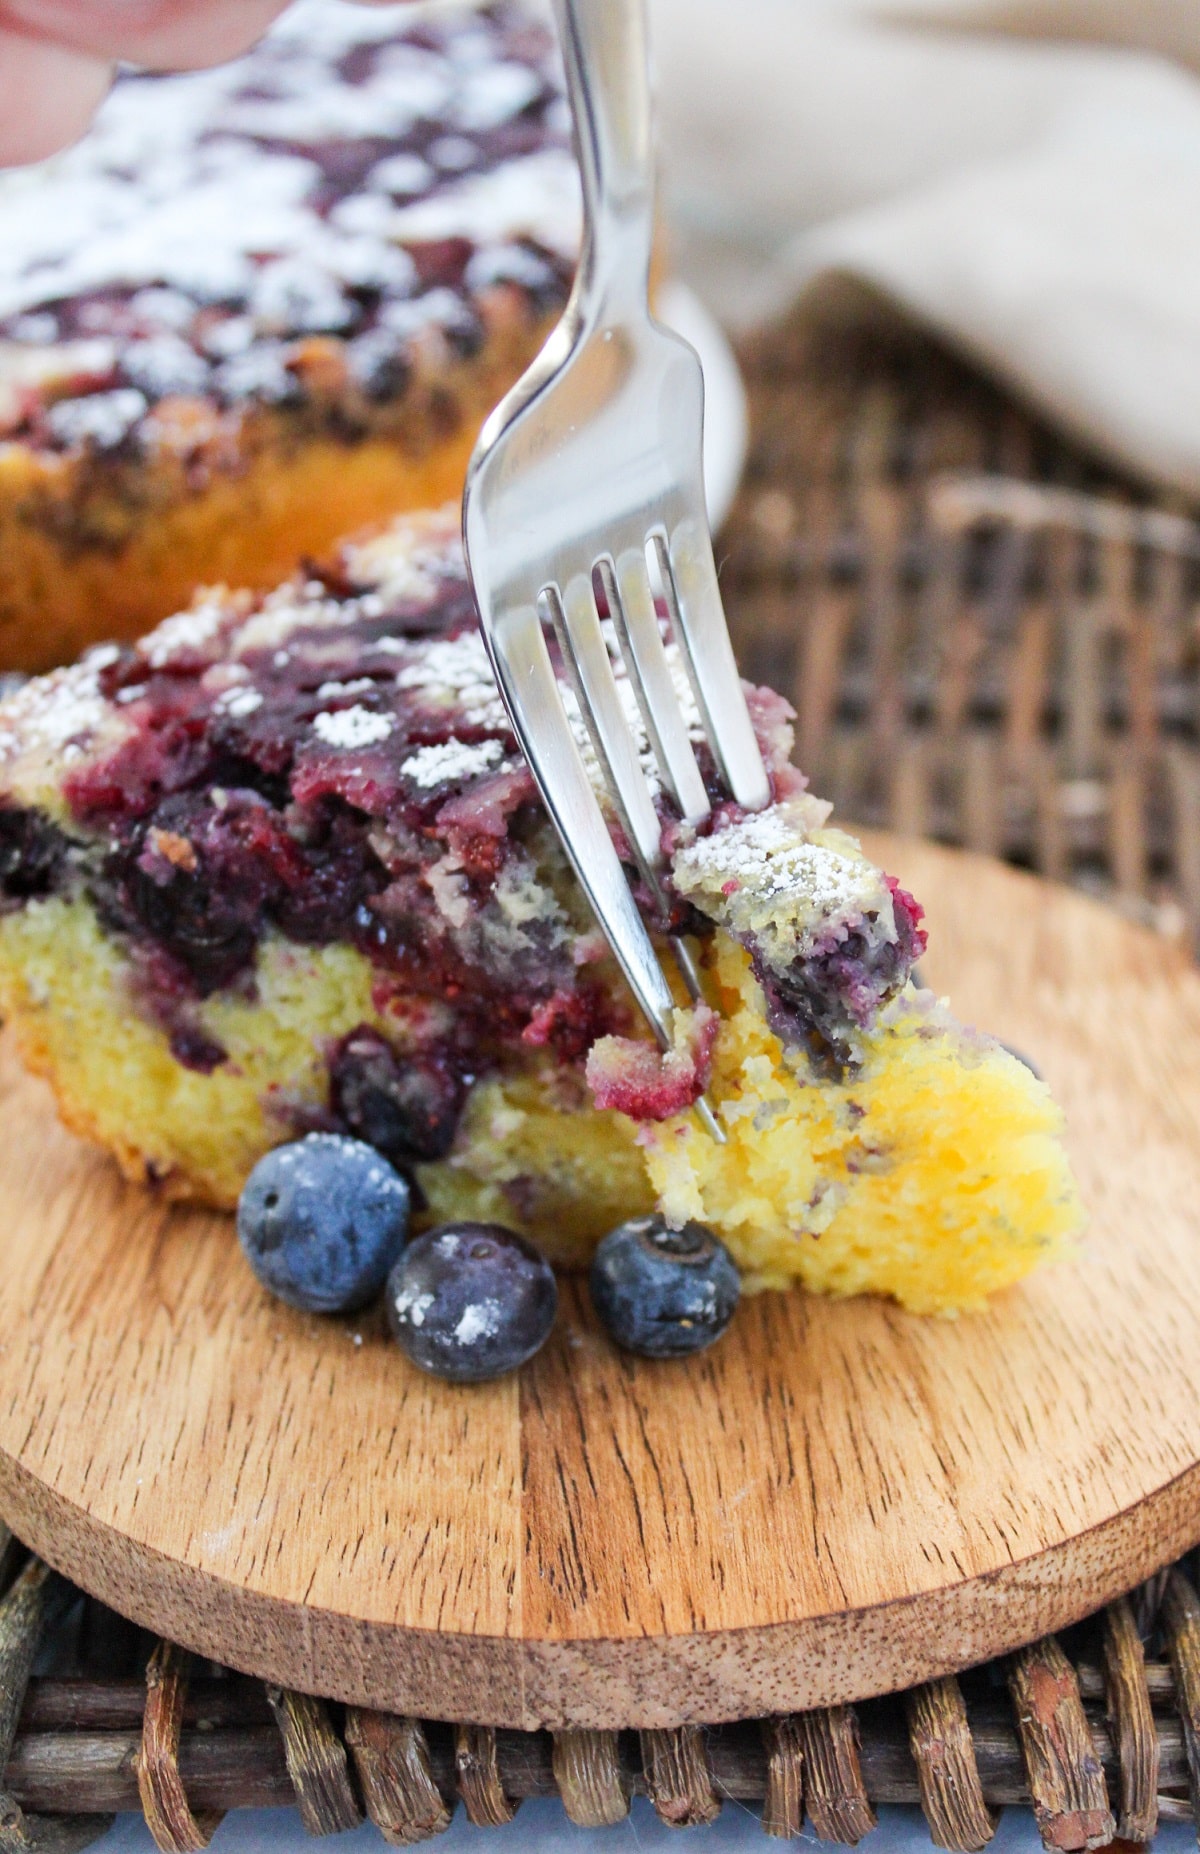 single slice of blueberry lemon cake with fresh blueberries on the side. A fork is in the cake to take a bite.